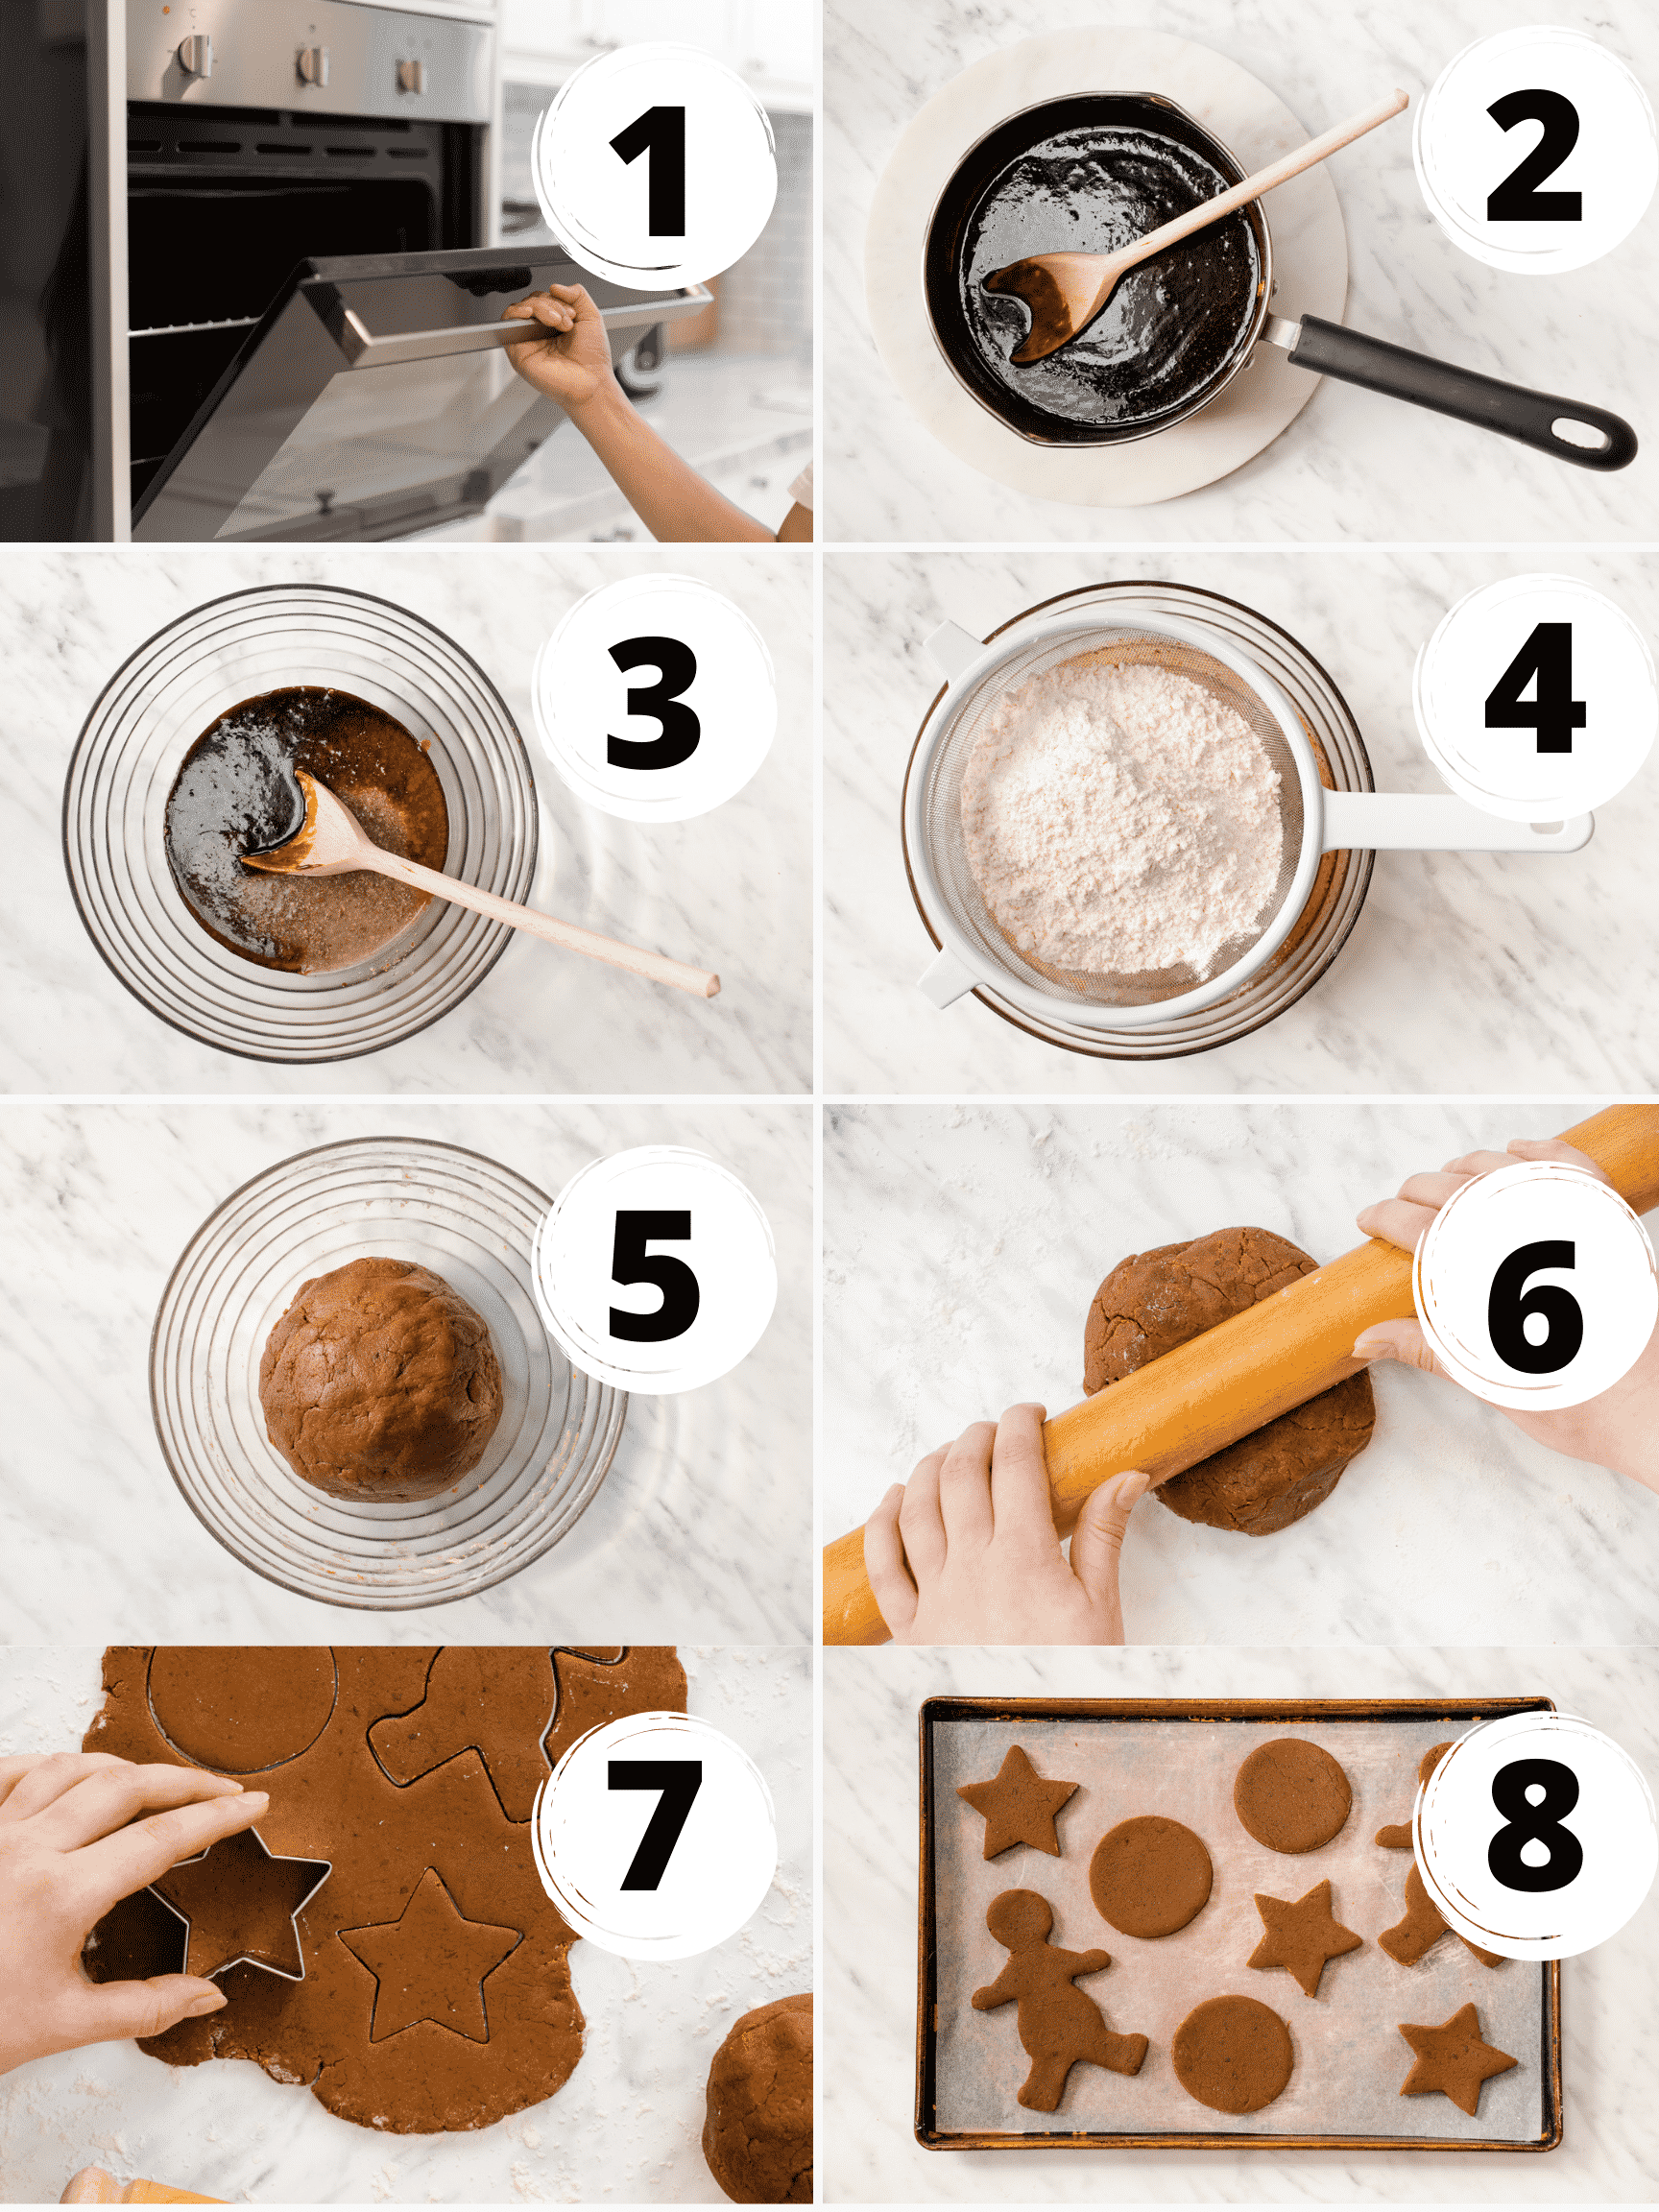 Collage of 8 steps to make vegan gingerbread cookies from scratch